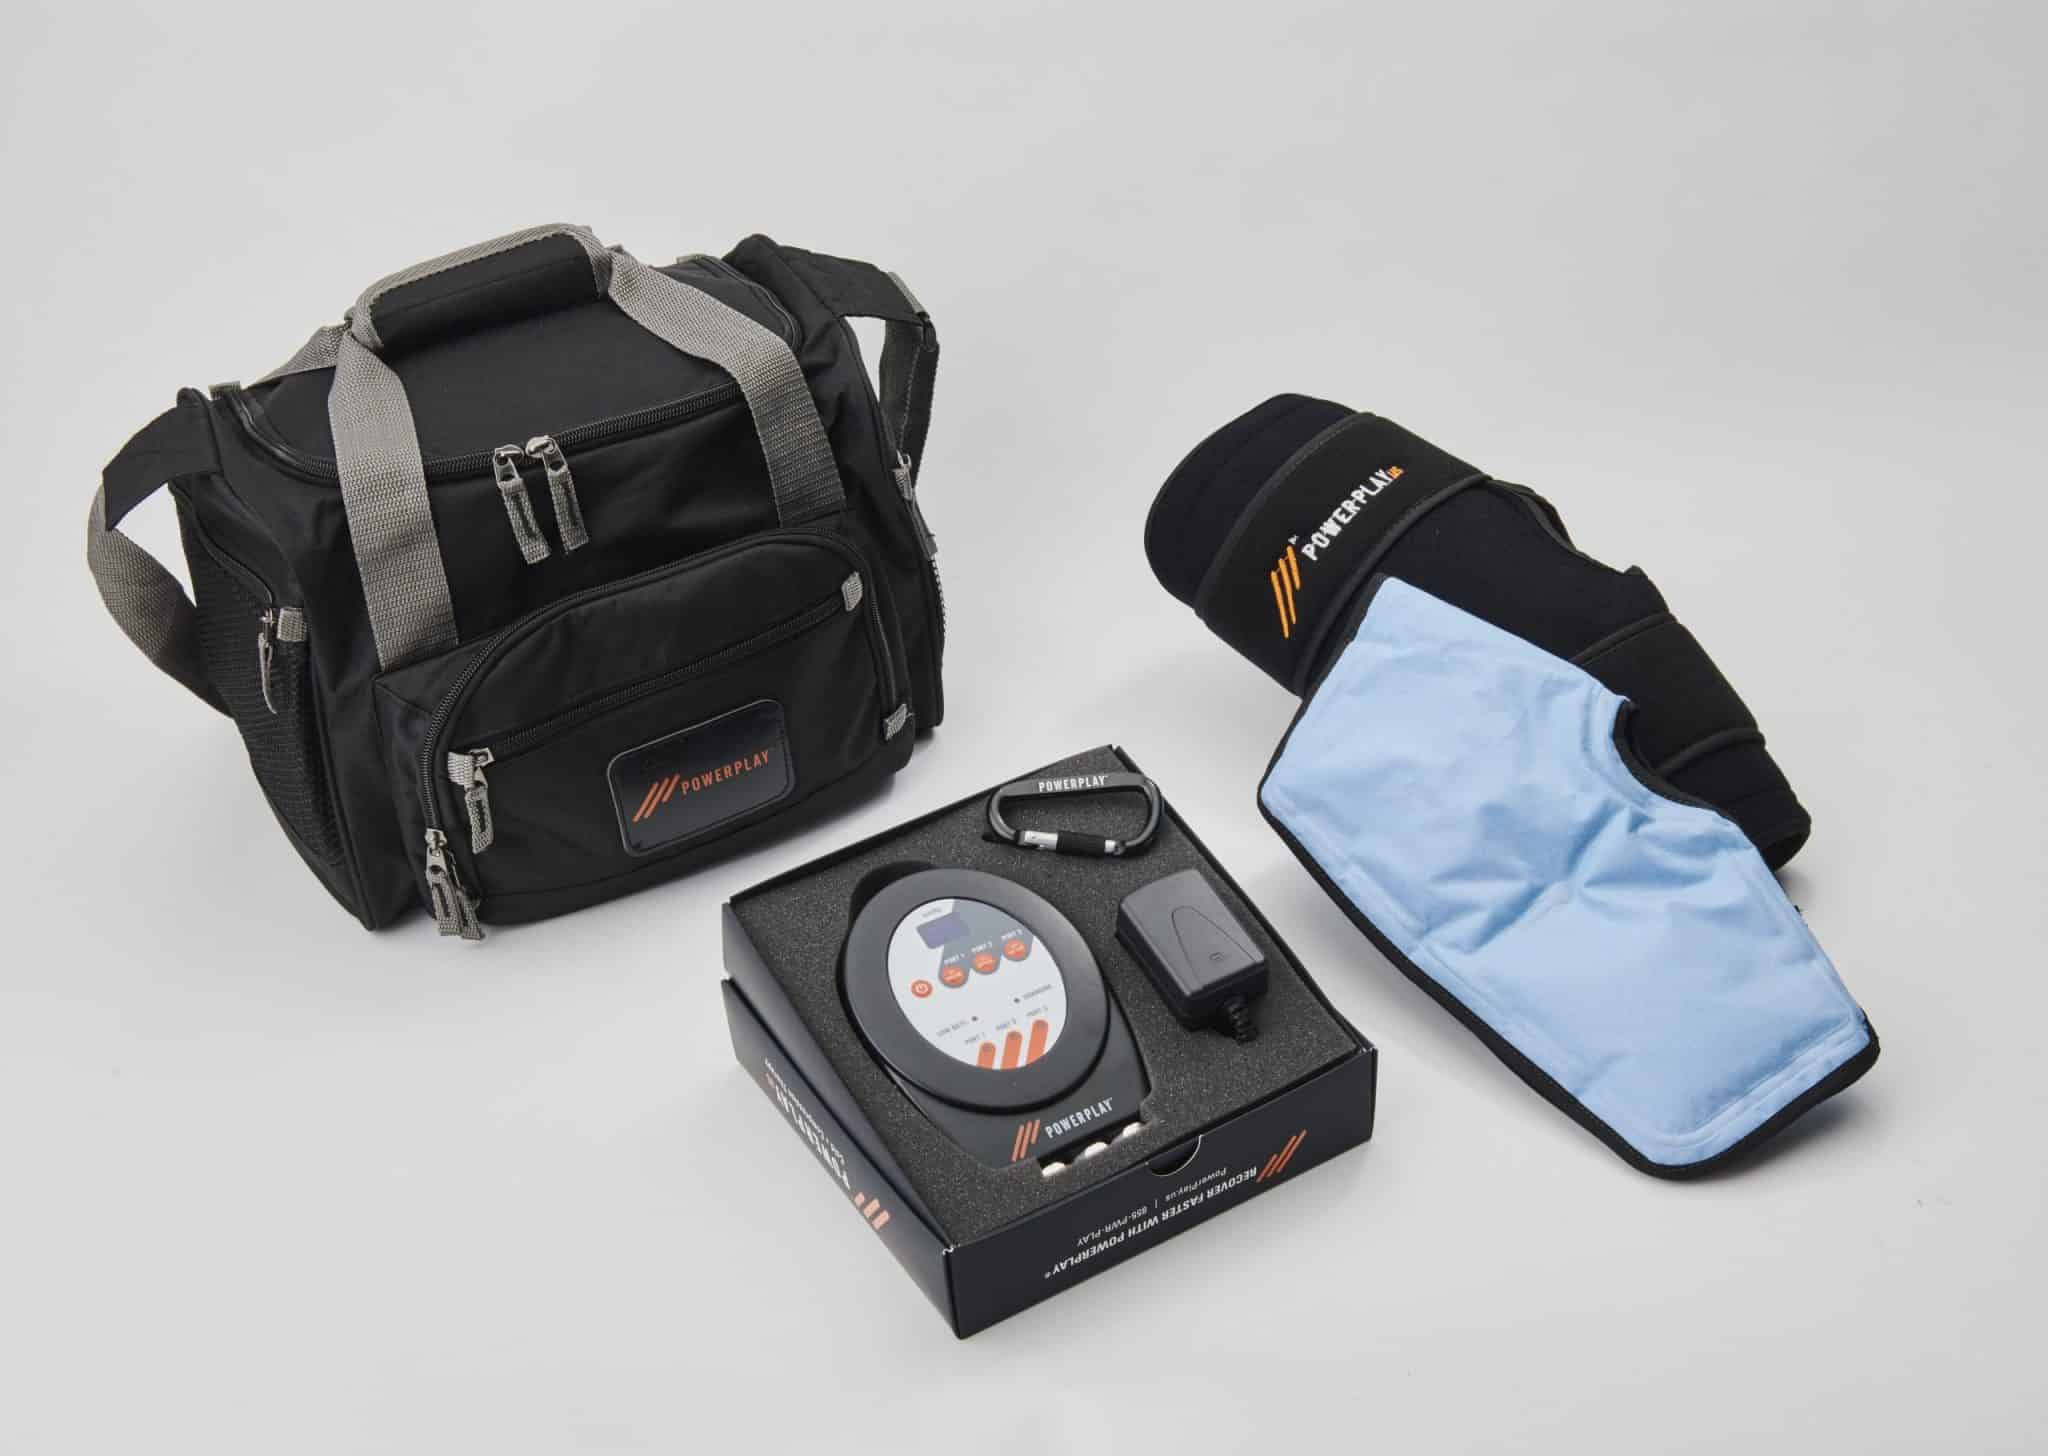  PowerPlay single kit with compression pump, wrap, and ice gel